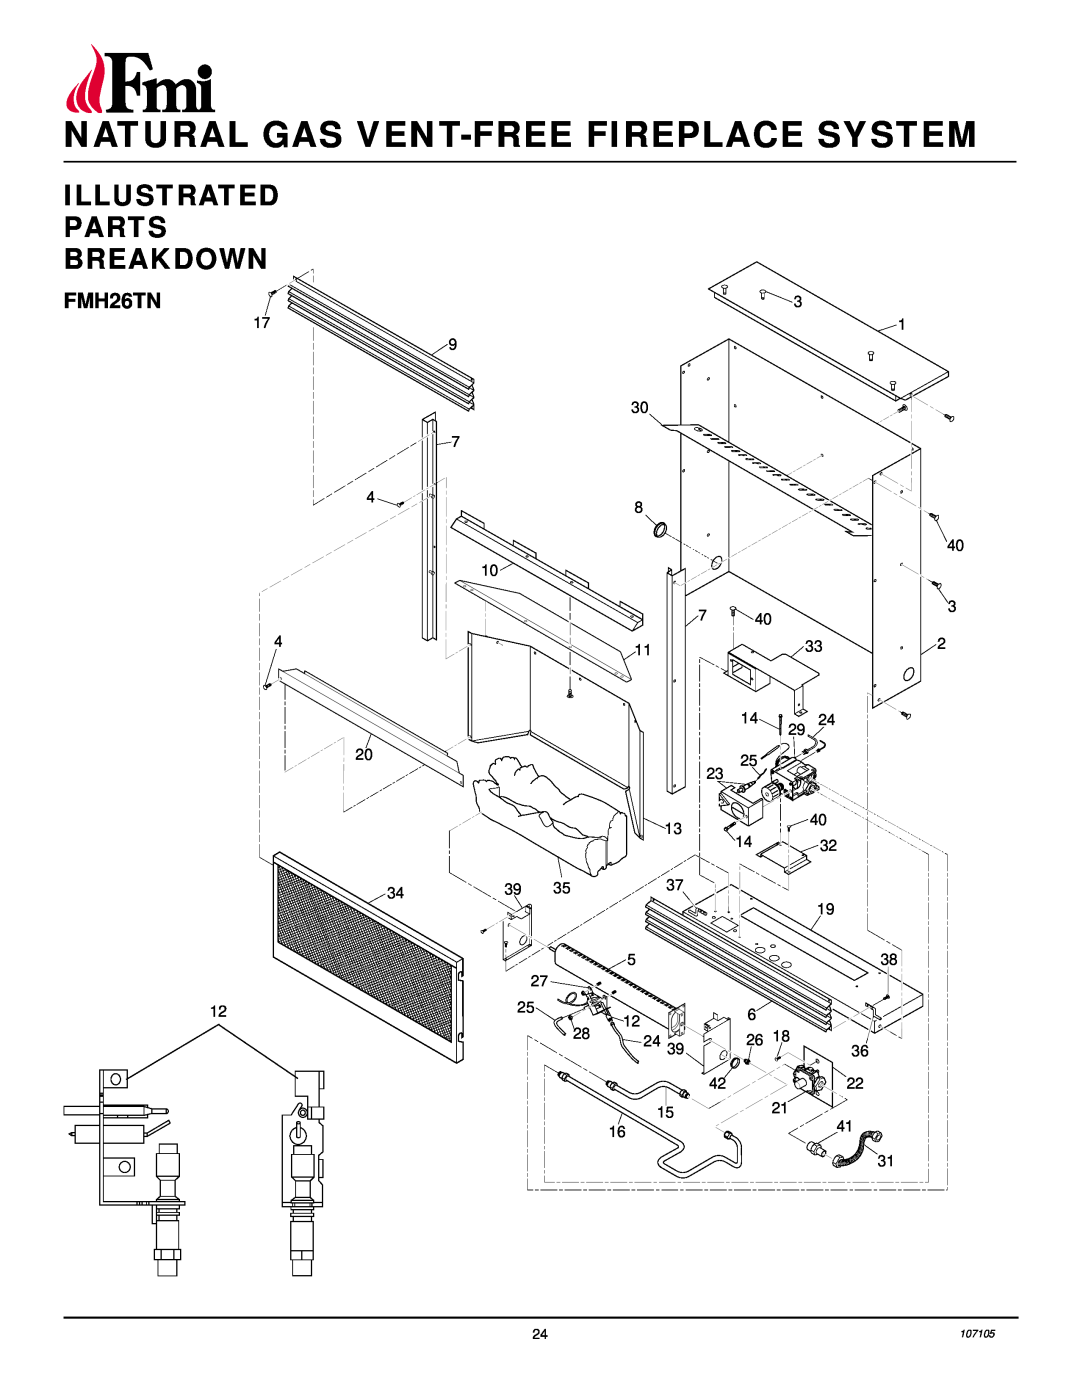 FMI FMH26TN installation manual Illustrated Parts Breakdown, Natural Gas Vent-Freefireplace System 